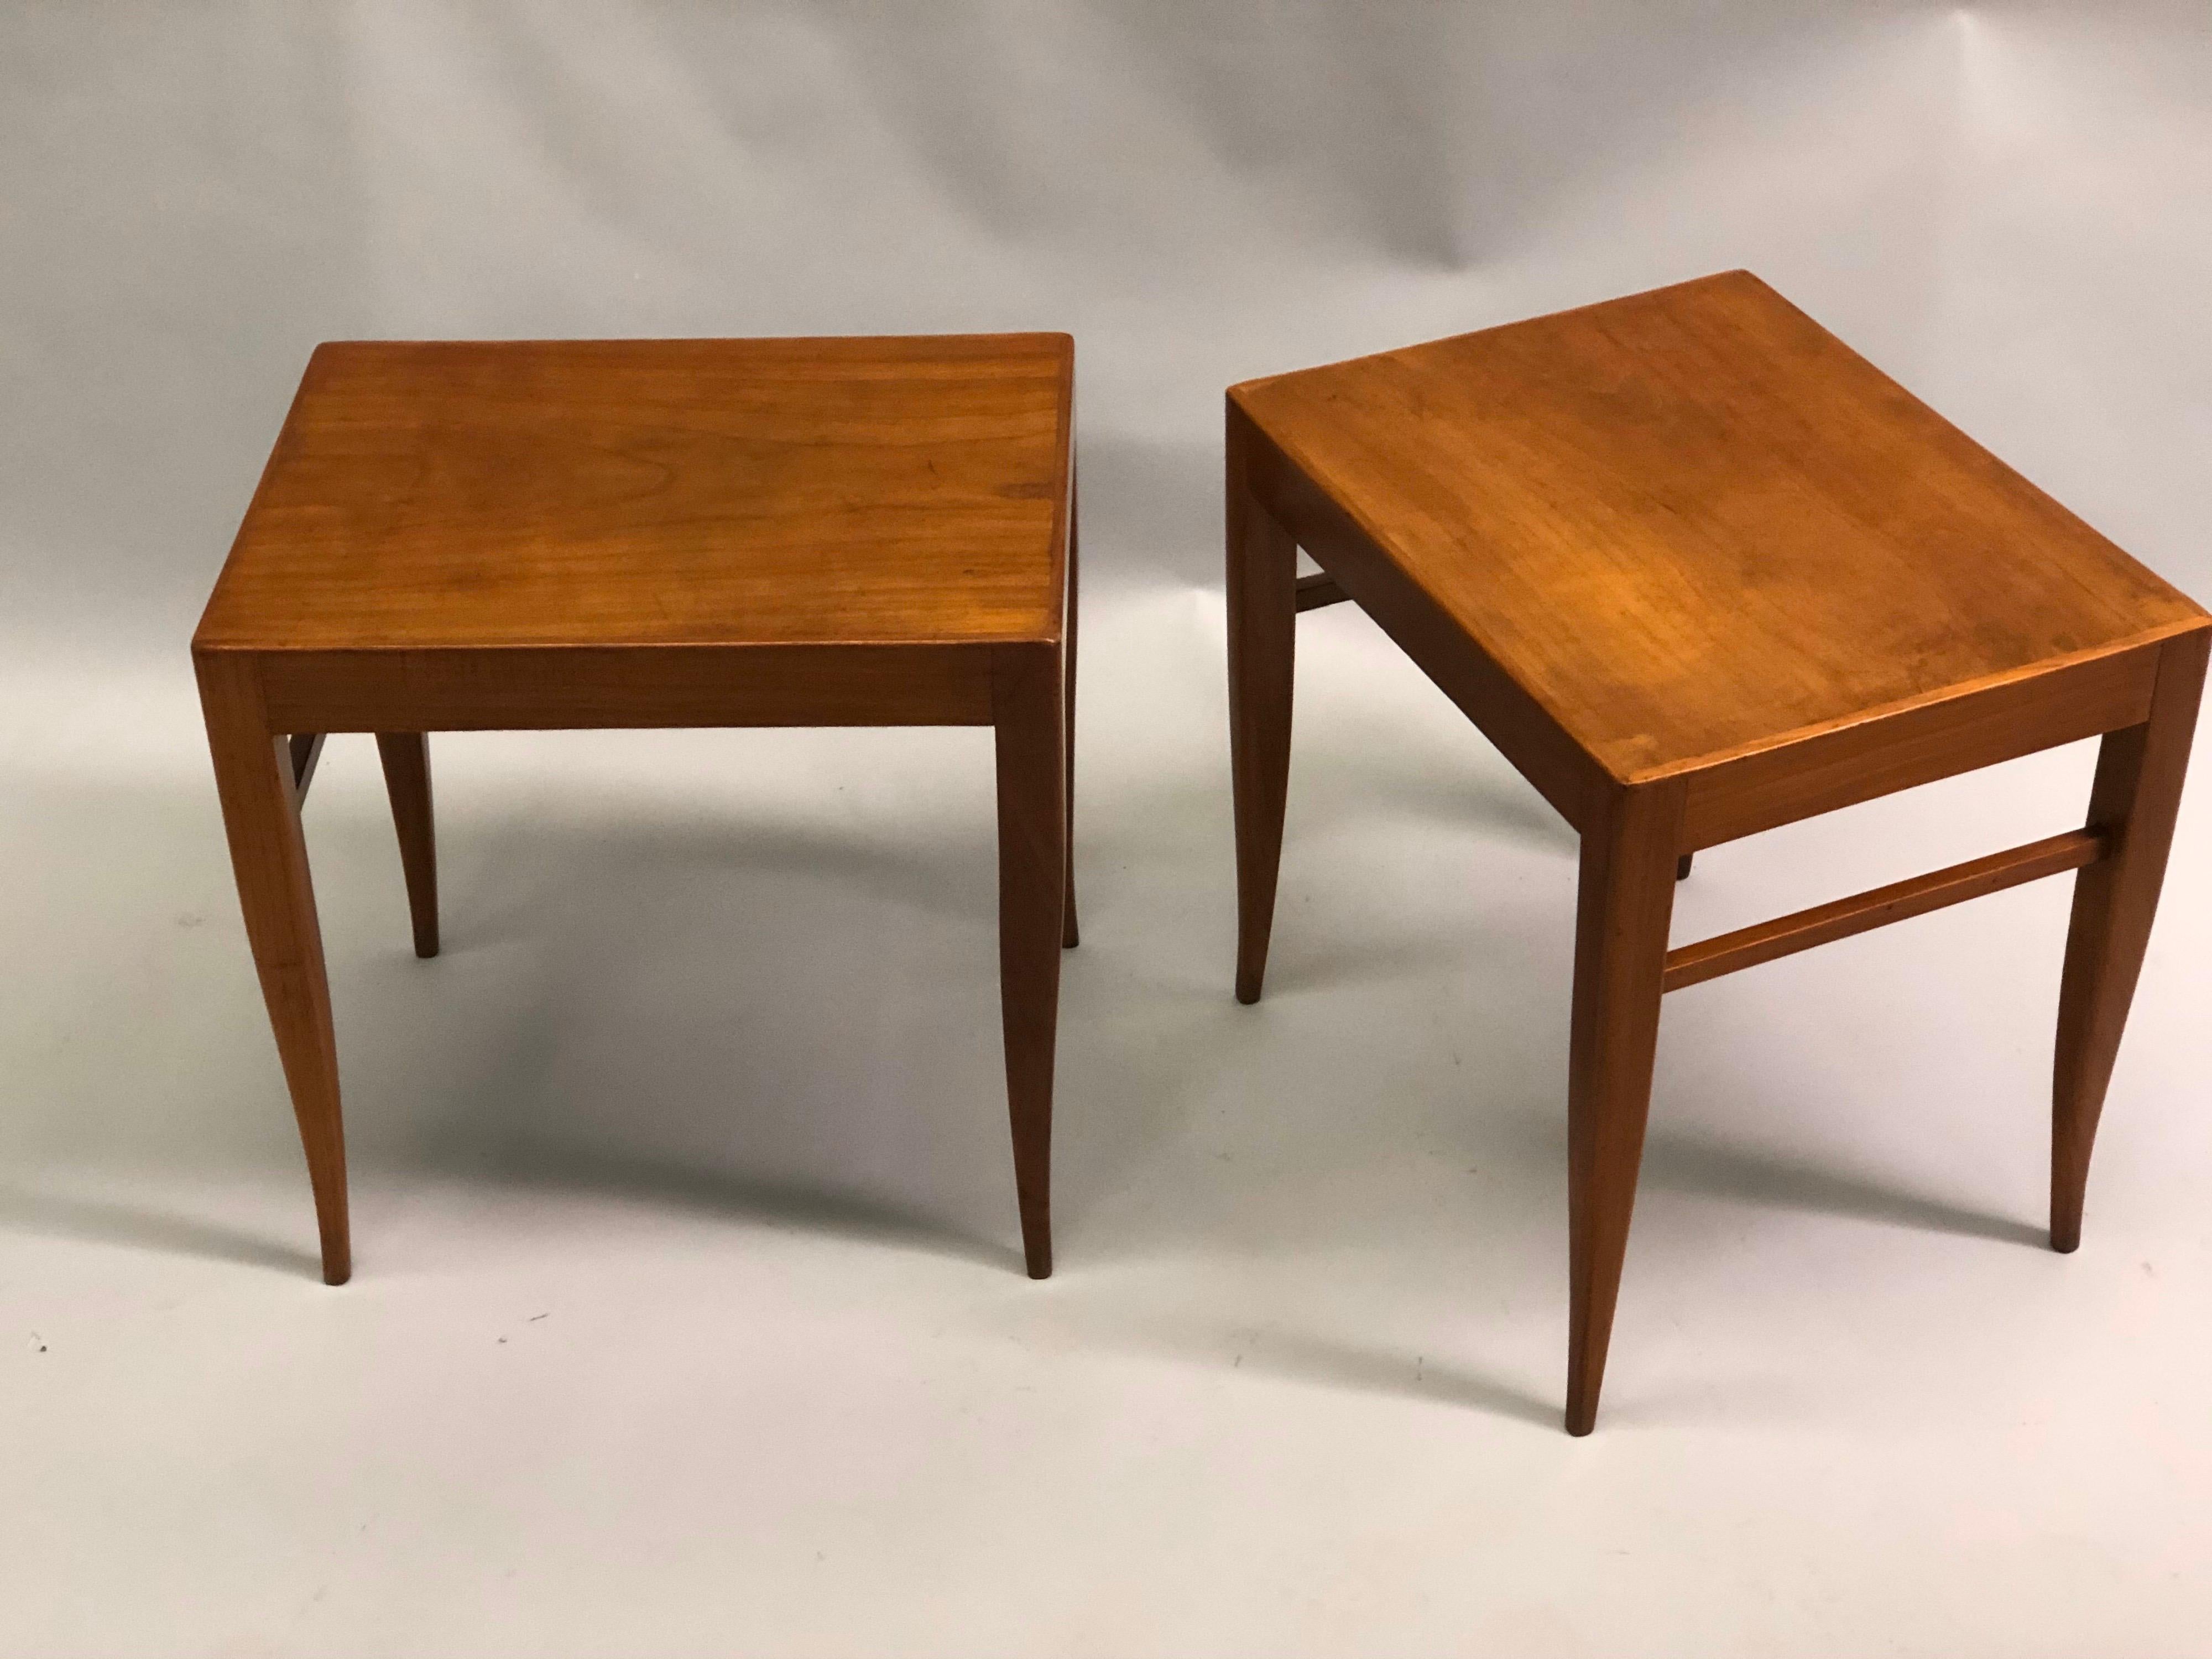 Elegant and timeless pair of Italian Mid-Century Modern craftsman carved cherry wood benches or stools from the circle of Gio Ponti and his work at the hotel, Hotel Parco di Principe, Italy, 1954. These are rare, handmade pieces expressing purity